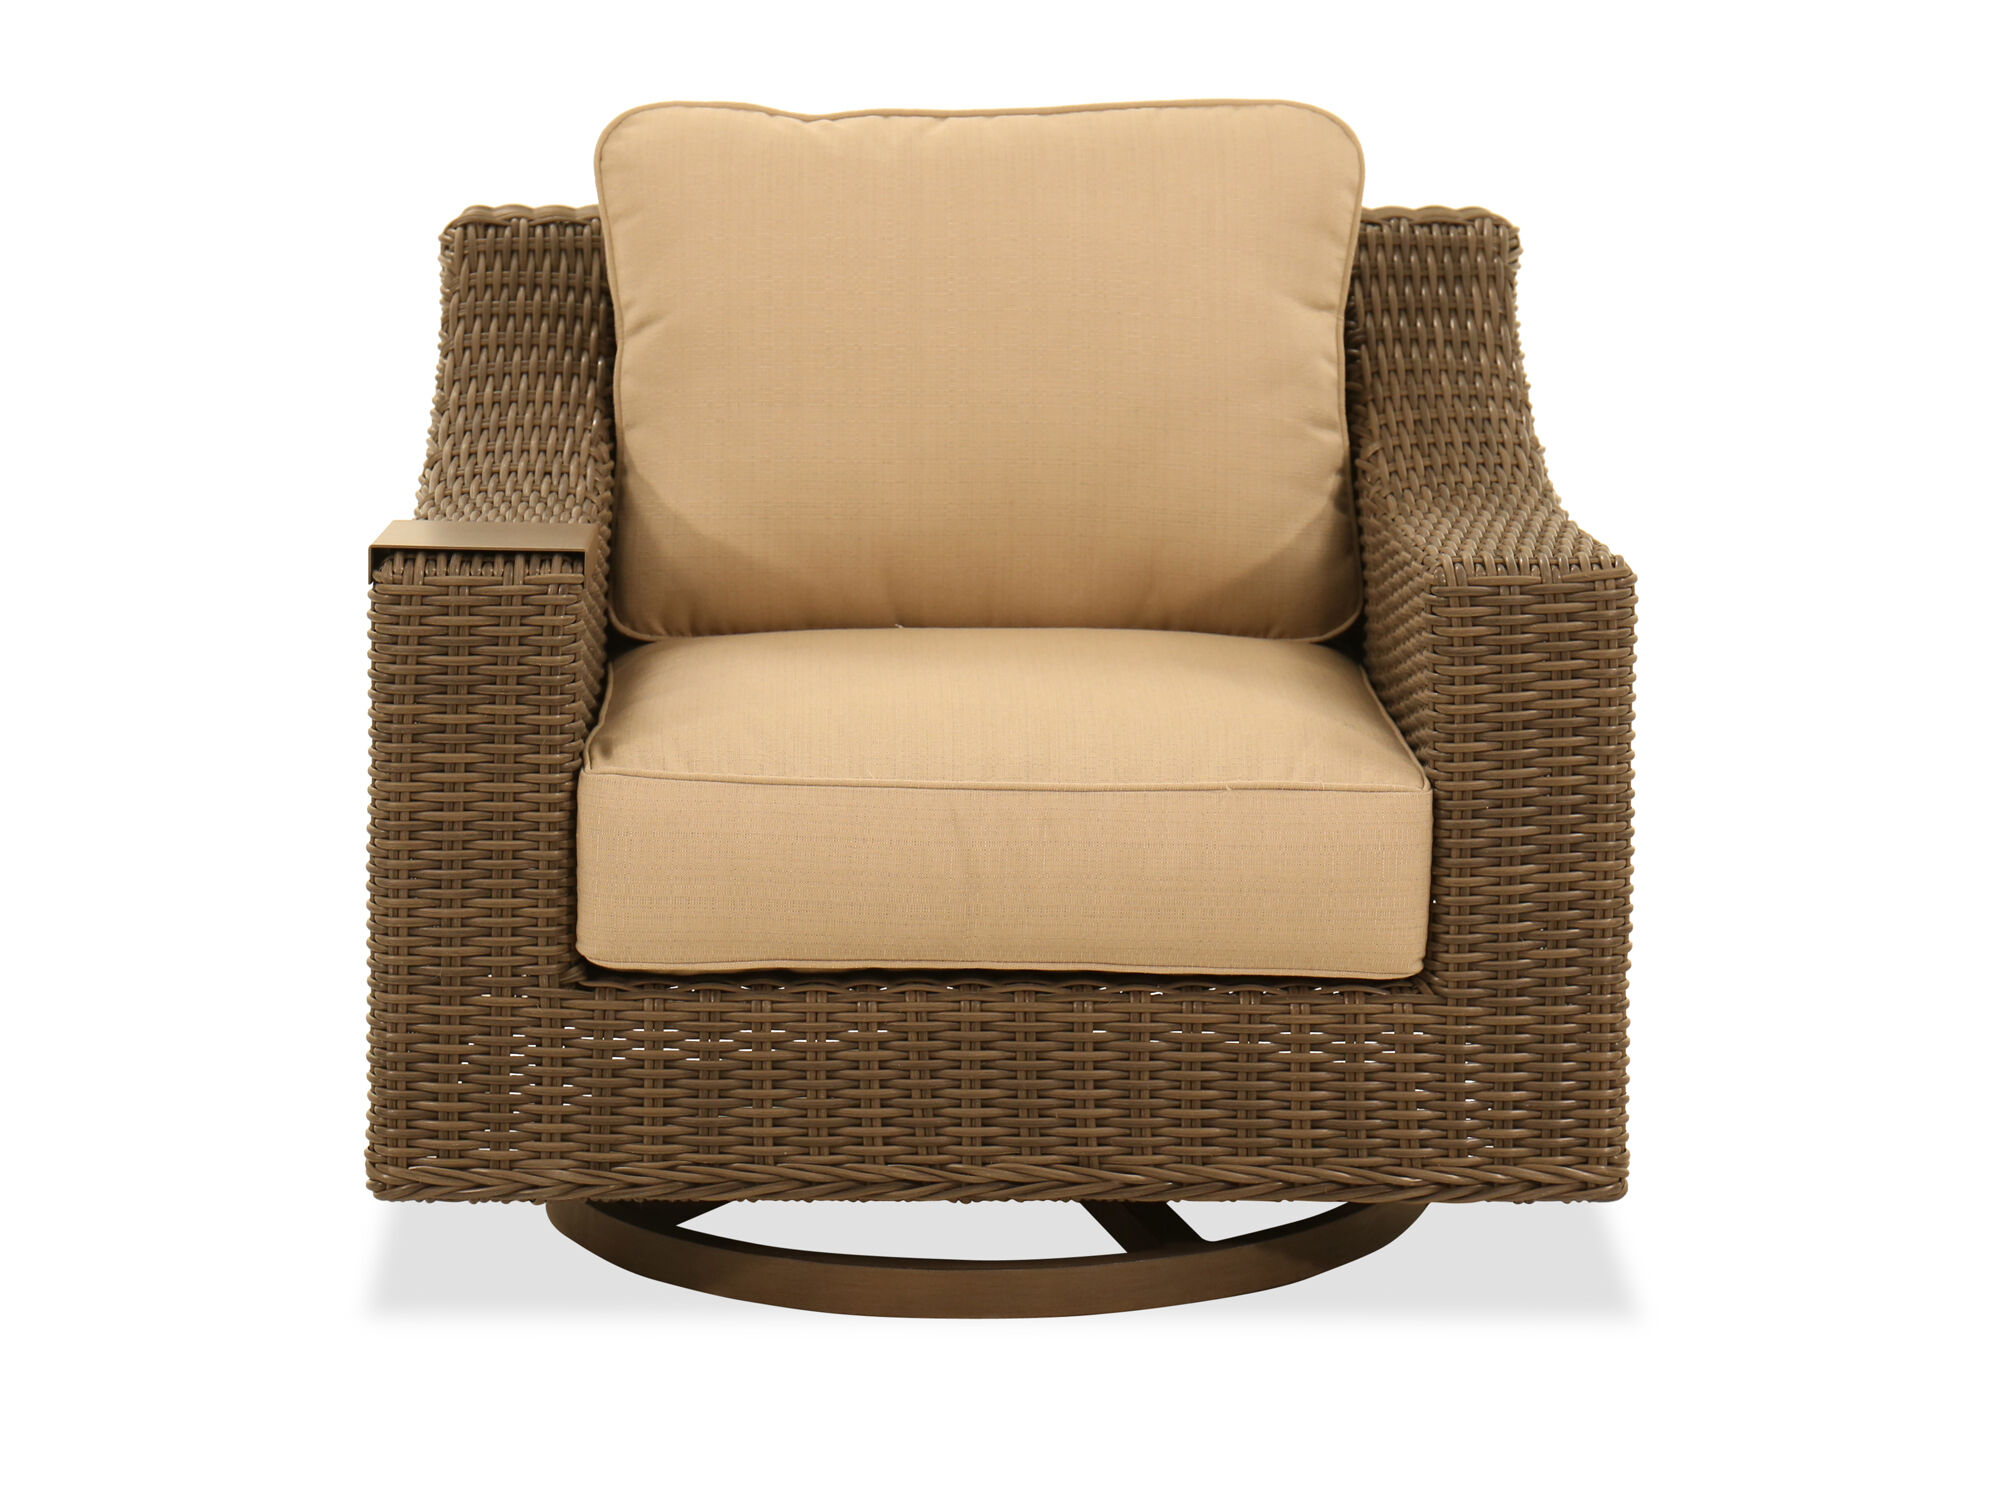 Swivel Glider Club Chair in Aged Teak | Mathis Brothers ...